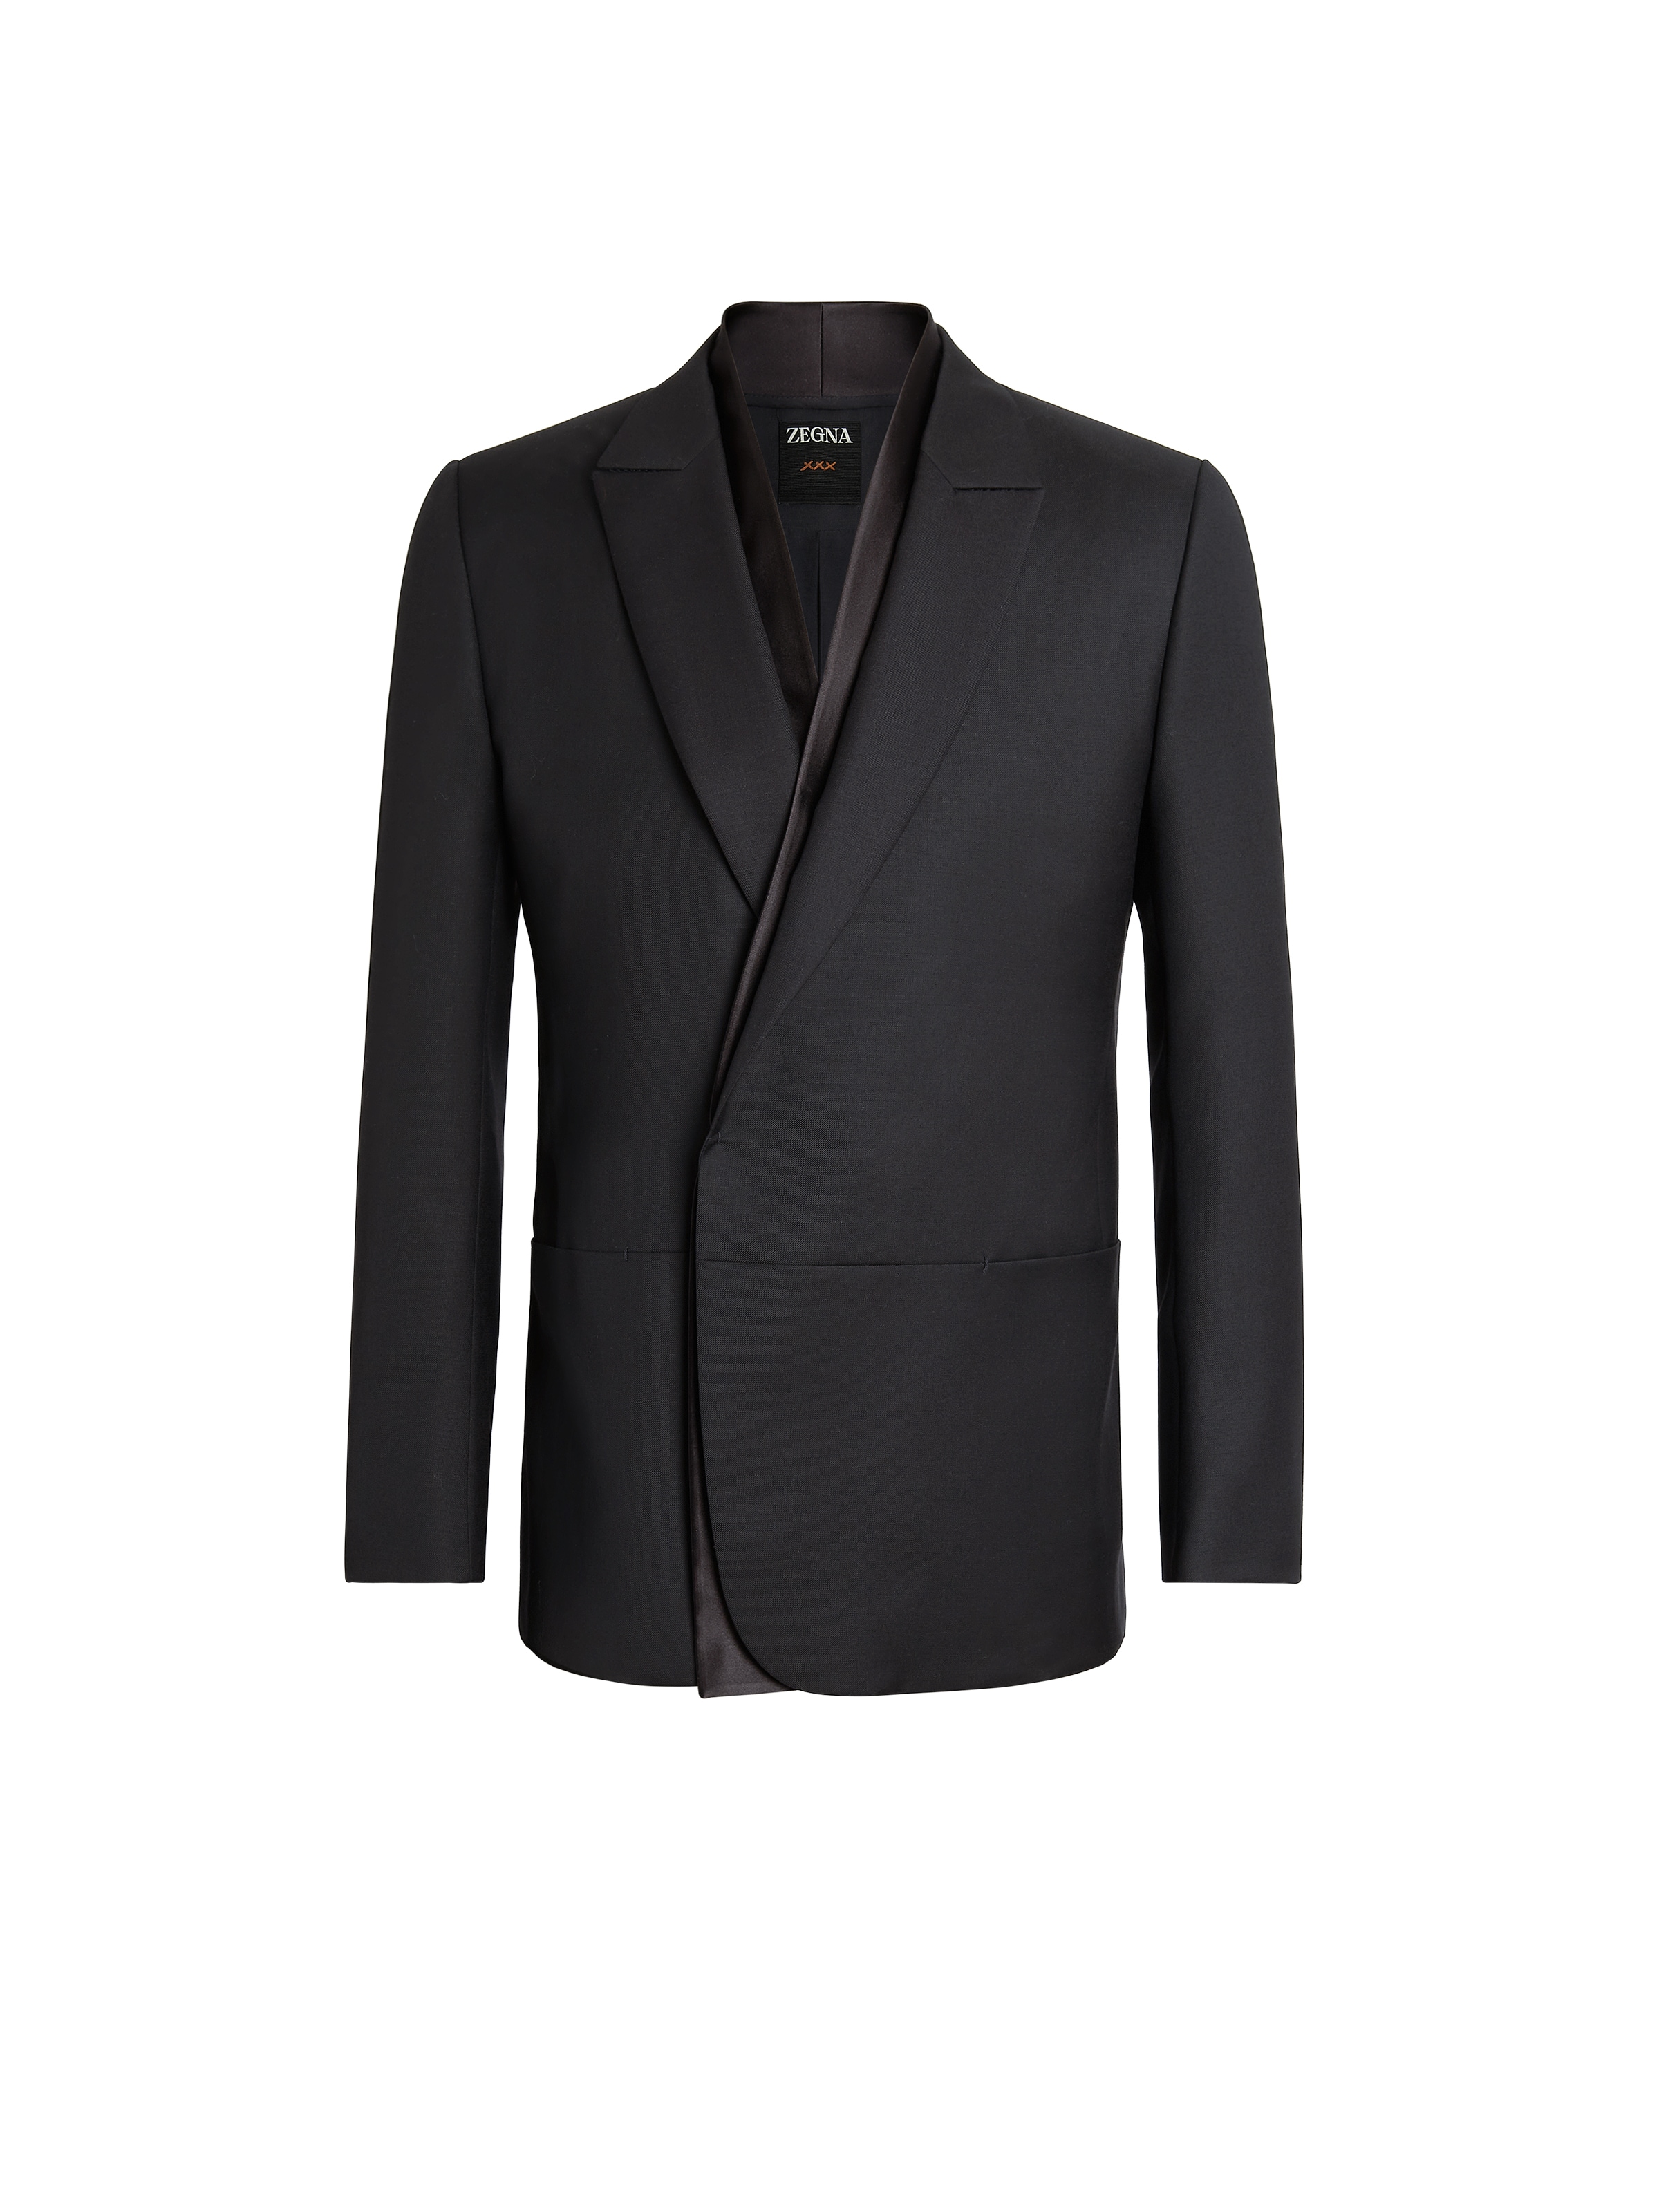 Zegna Black Wool And Mohair Evening Jacket